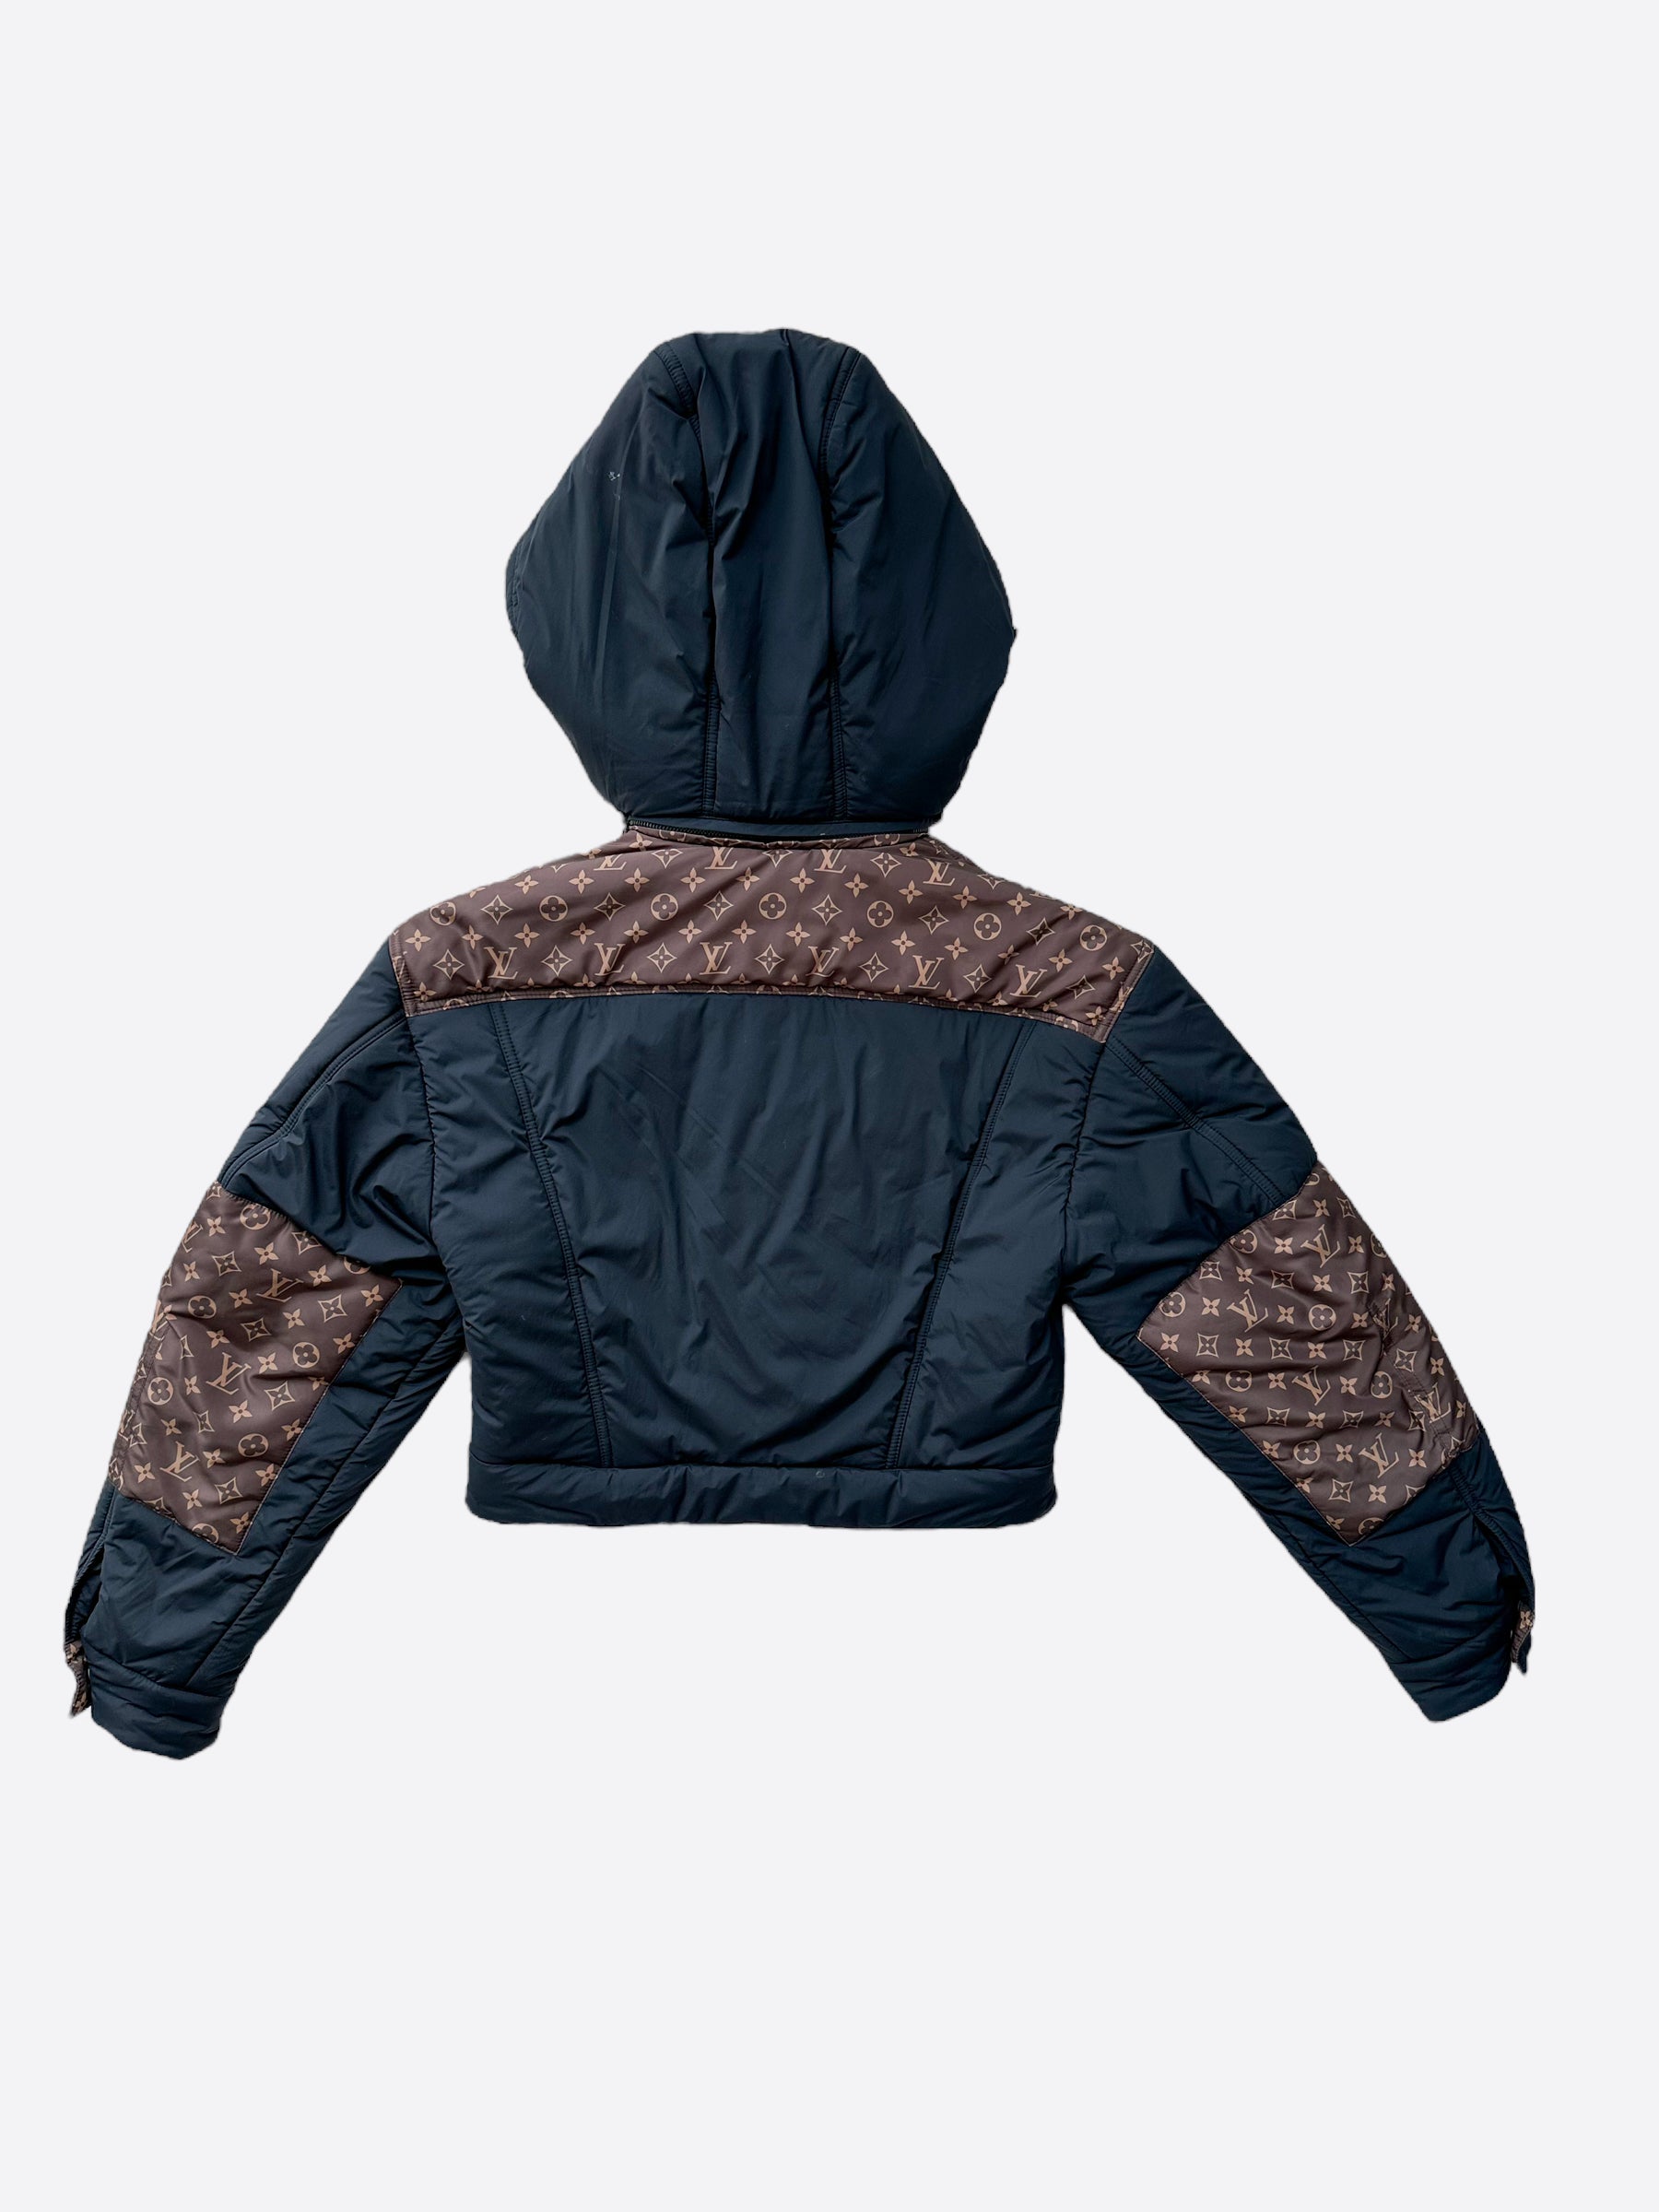 LOUIS VUITTON Reversible Quilted Hooded Jacket Vanilla. Size 36